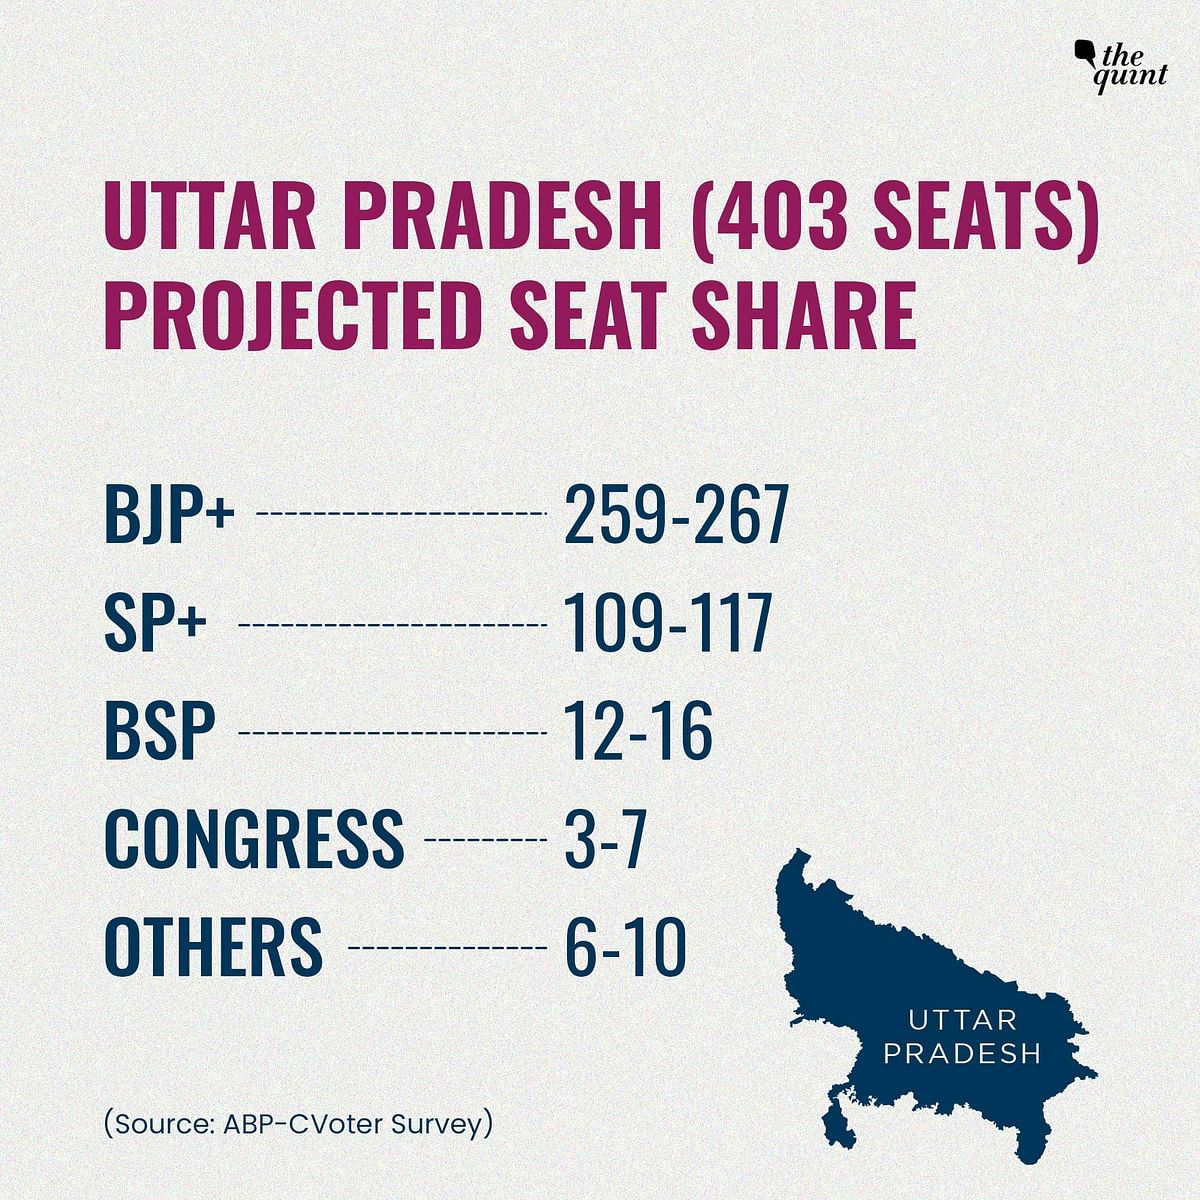 Meanwhile, the Samajwadi Party+ is expected to see an increase of 65 seats, going from 48 in 2017 to 113 now. 